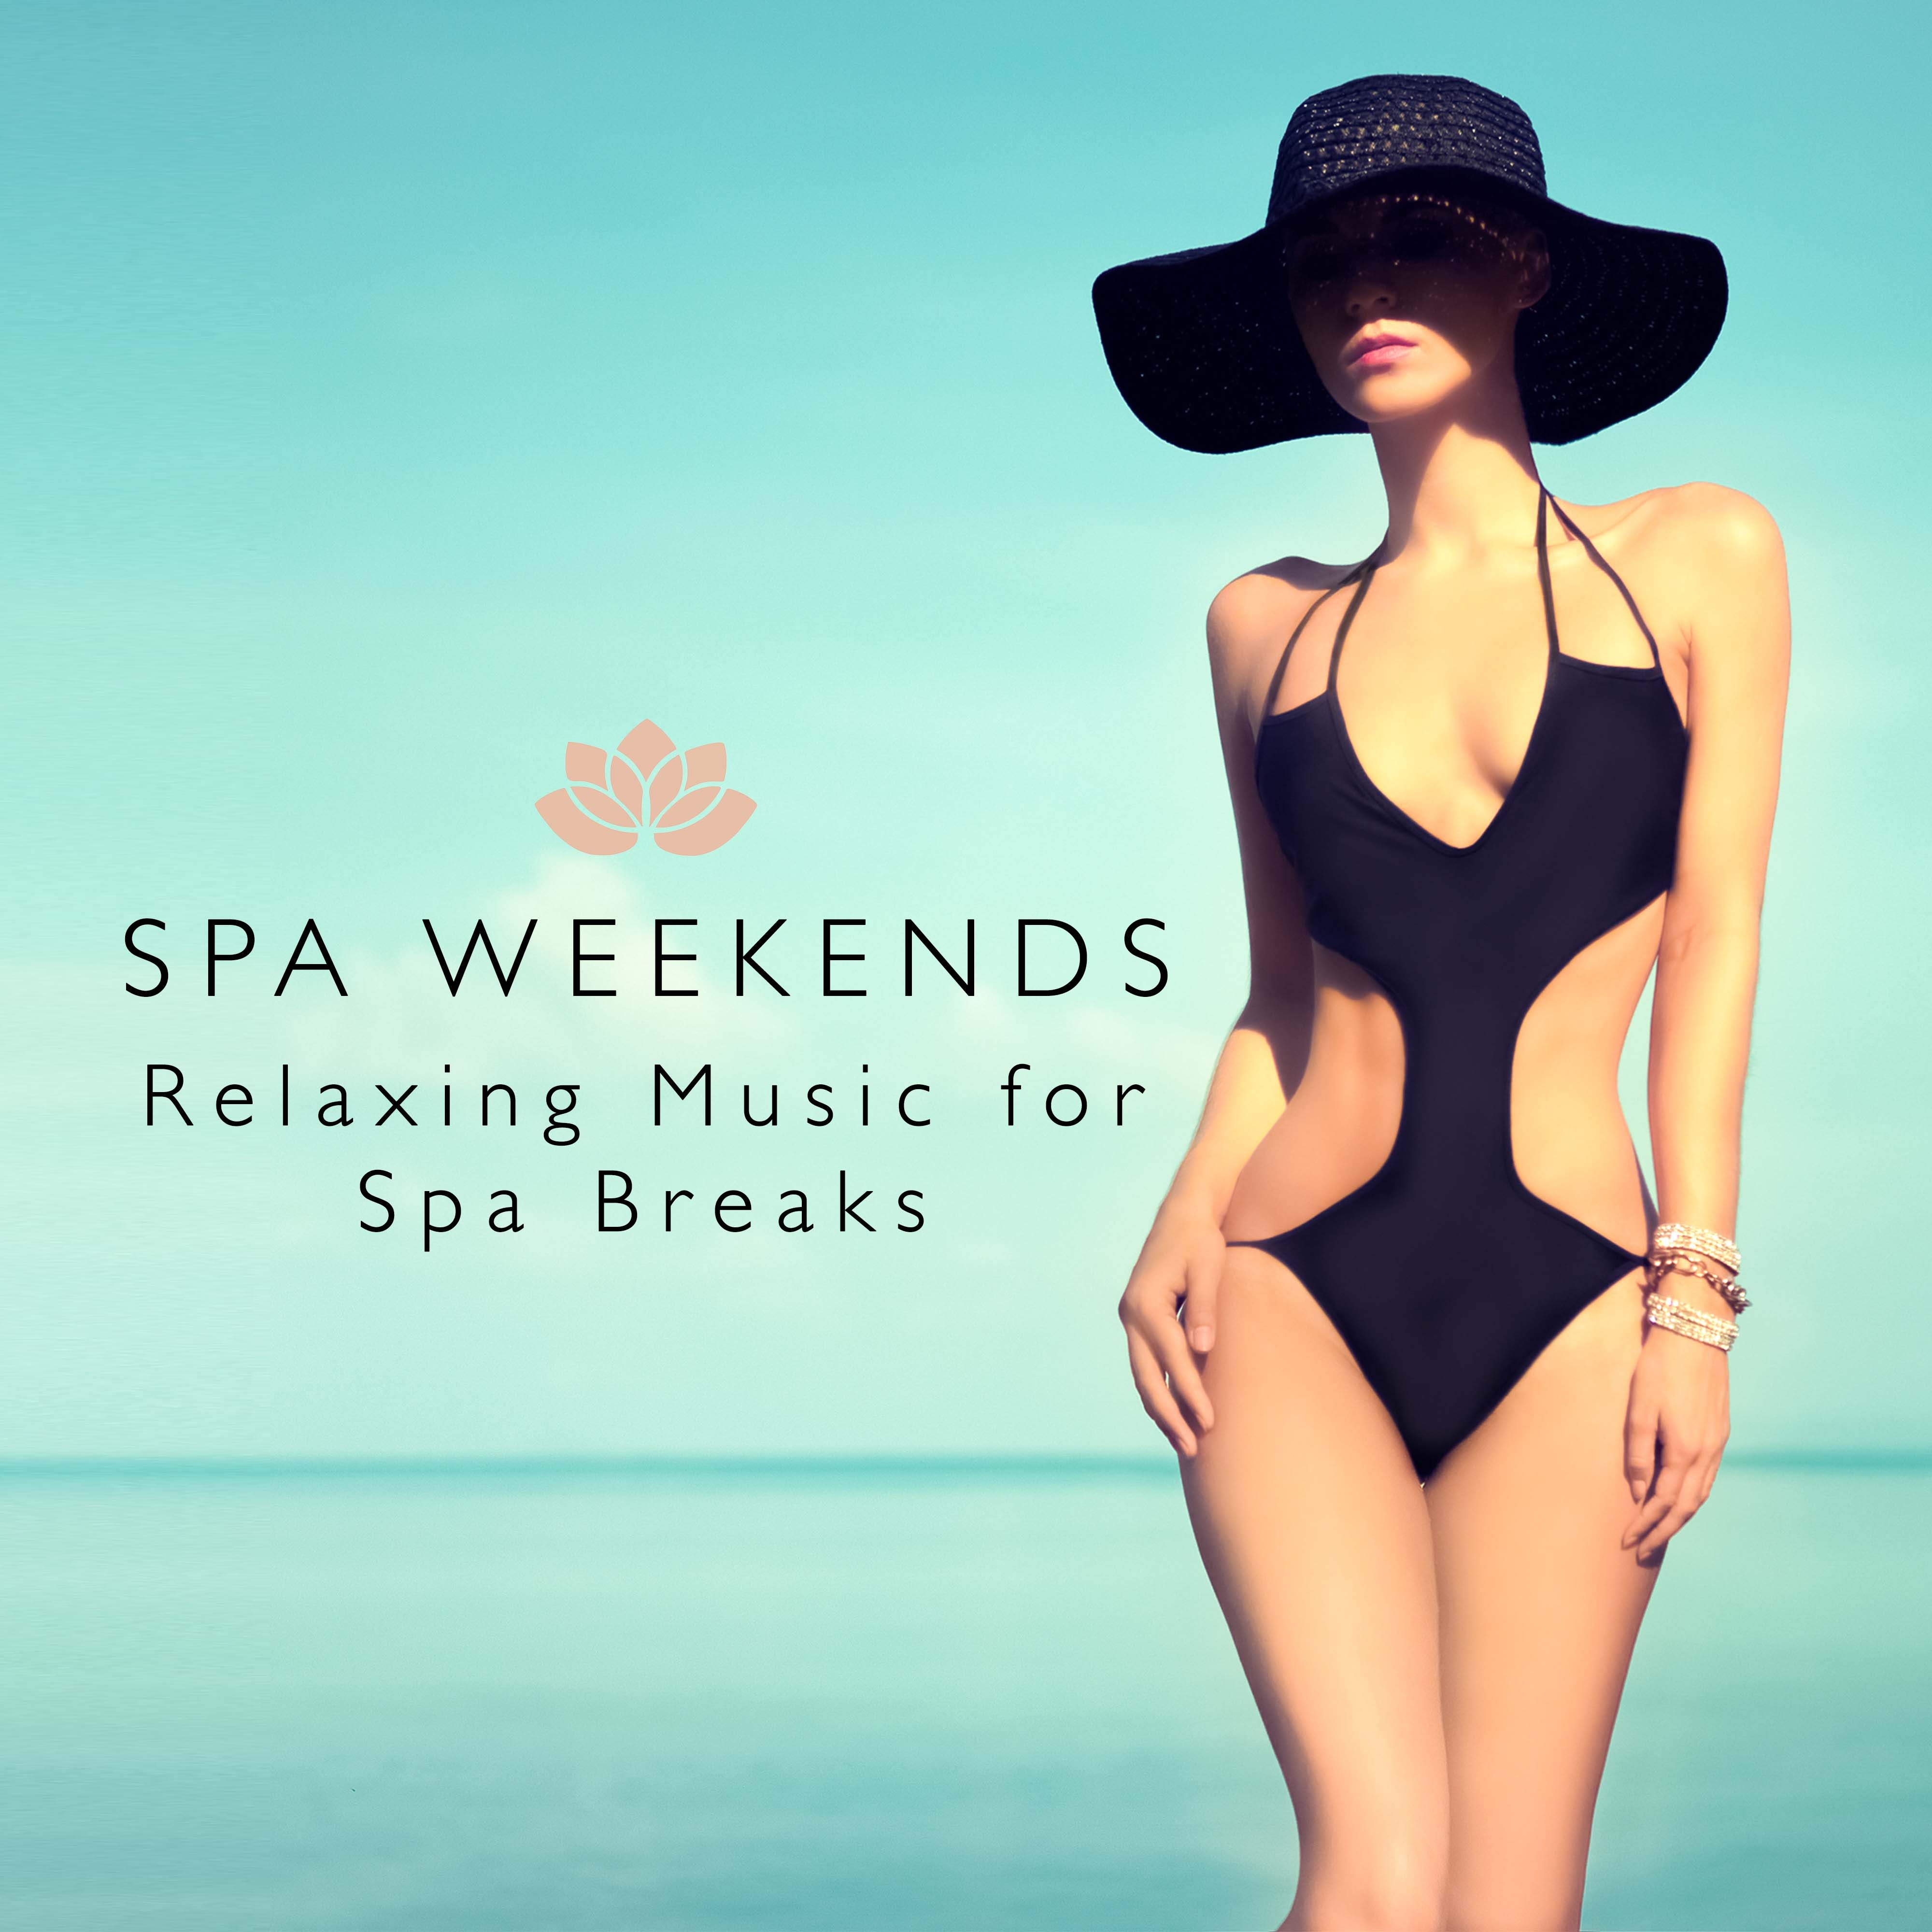 Spa Weekends - Relaxing Music for Spa Breaks for Couples with the Soothing Sounds of Nature